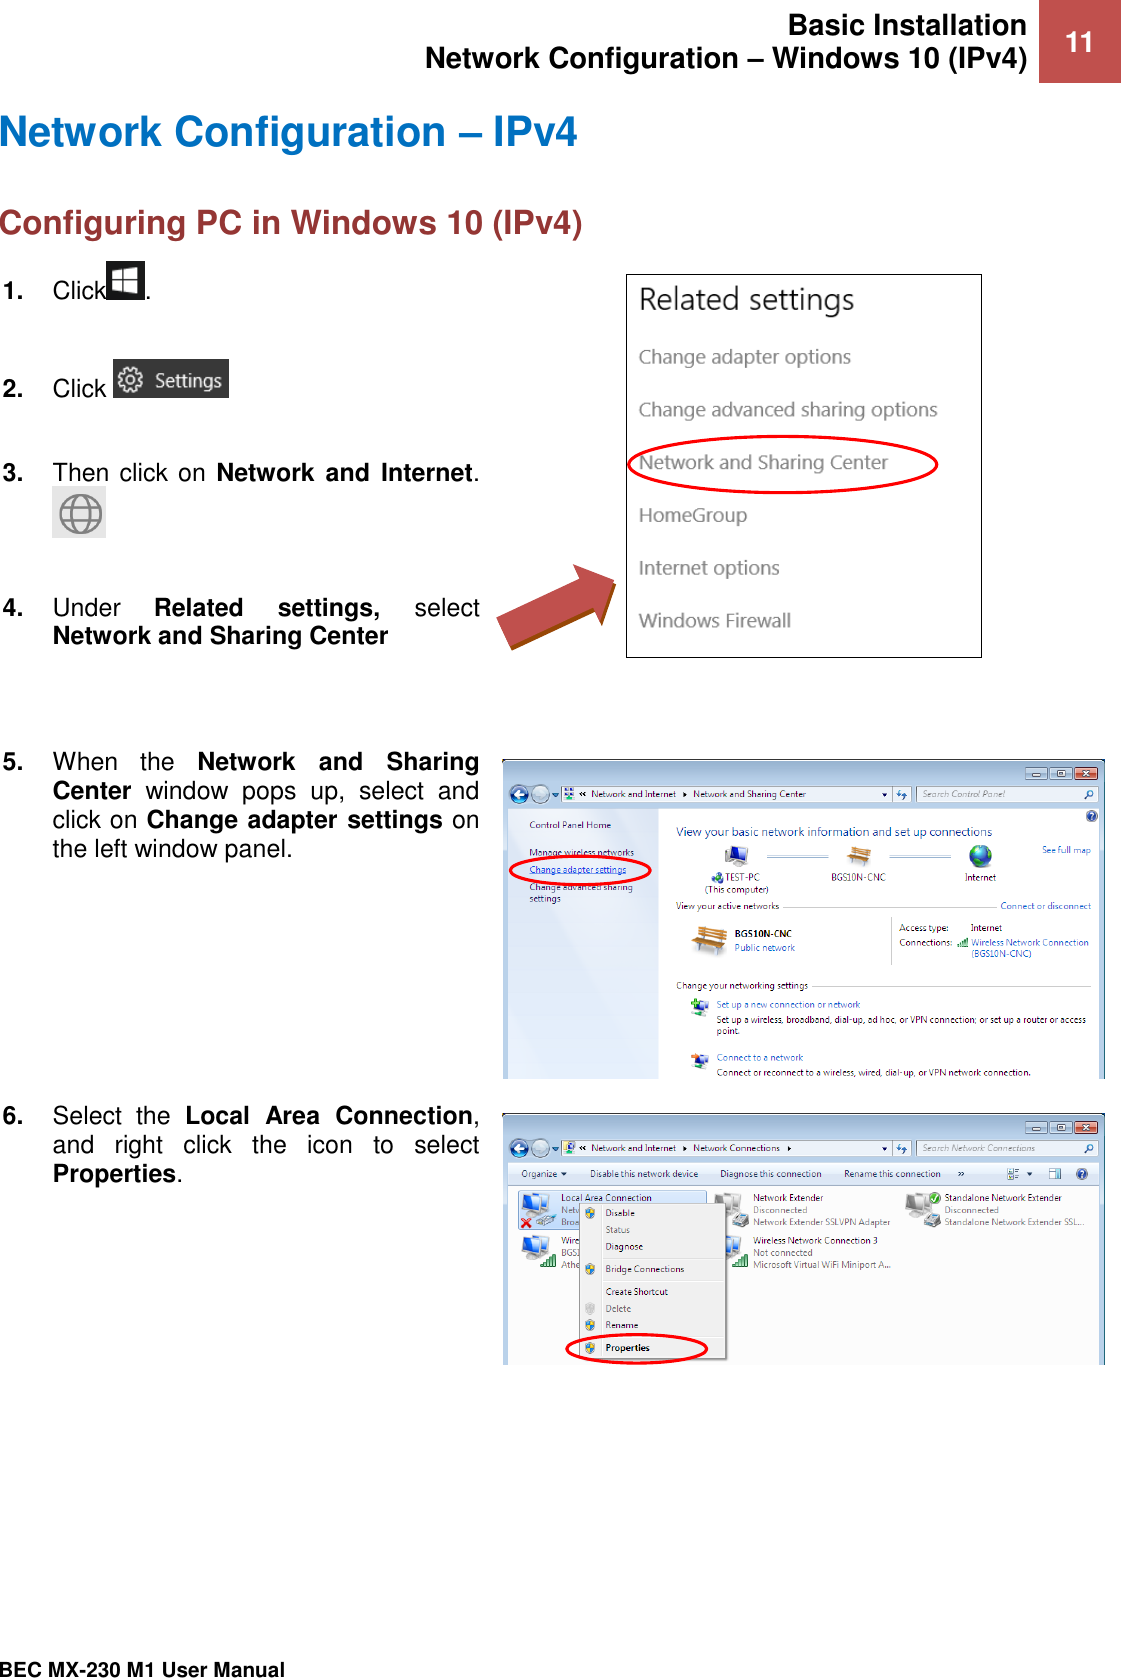 Basic Installation Network Configuration – Windows 10 (IPv4) 11   BEC MX-230 M1 User Manual  Network Configuration – IPv4 Configuring PC in Windows 10 (IPv4)    1. Click .  2. Click    3. Then click on Network  and  Internet.   4. Under  Related  settings,  select Network and Sharing Center    5. When  the  Network  and  Sharing Center  window  pops  up,  select  and click on Change adapter settings on the left window panel.  6. Select  the  Local  Area  Connection, and  right  click  the  icon  to  select Properties.  